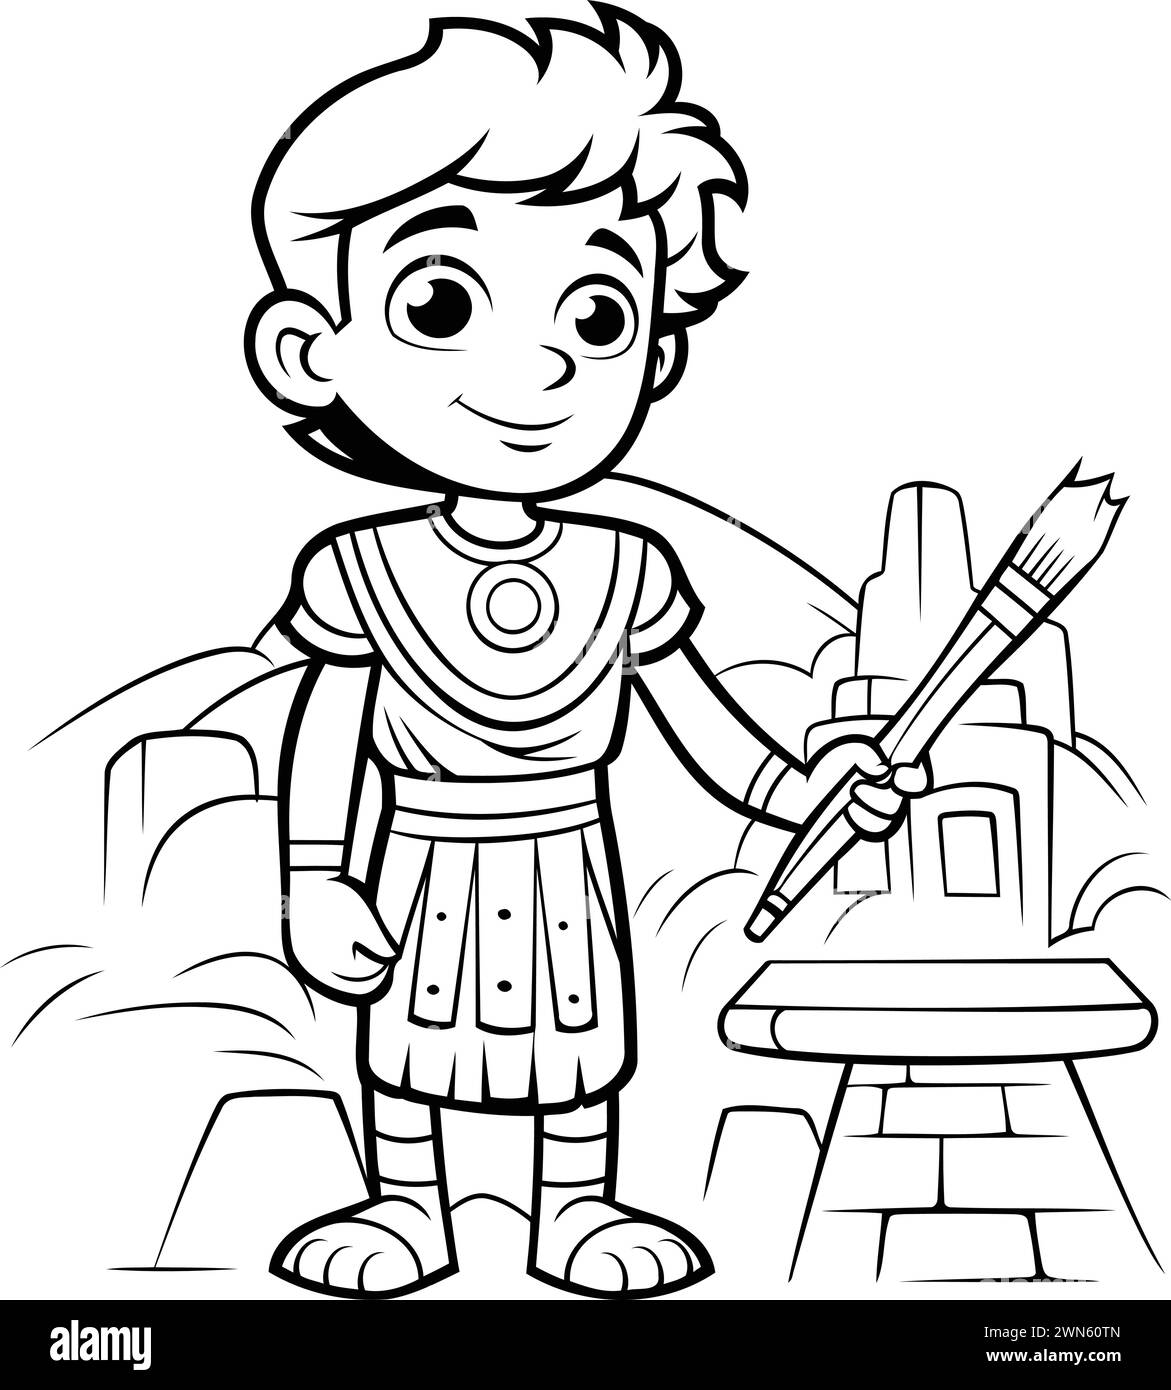 Coloring Page Outline of a Boy in Roman Costume with Spear Stock Vector